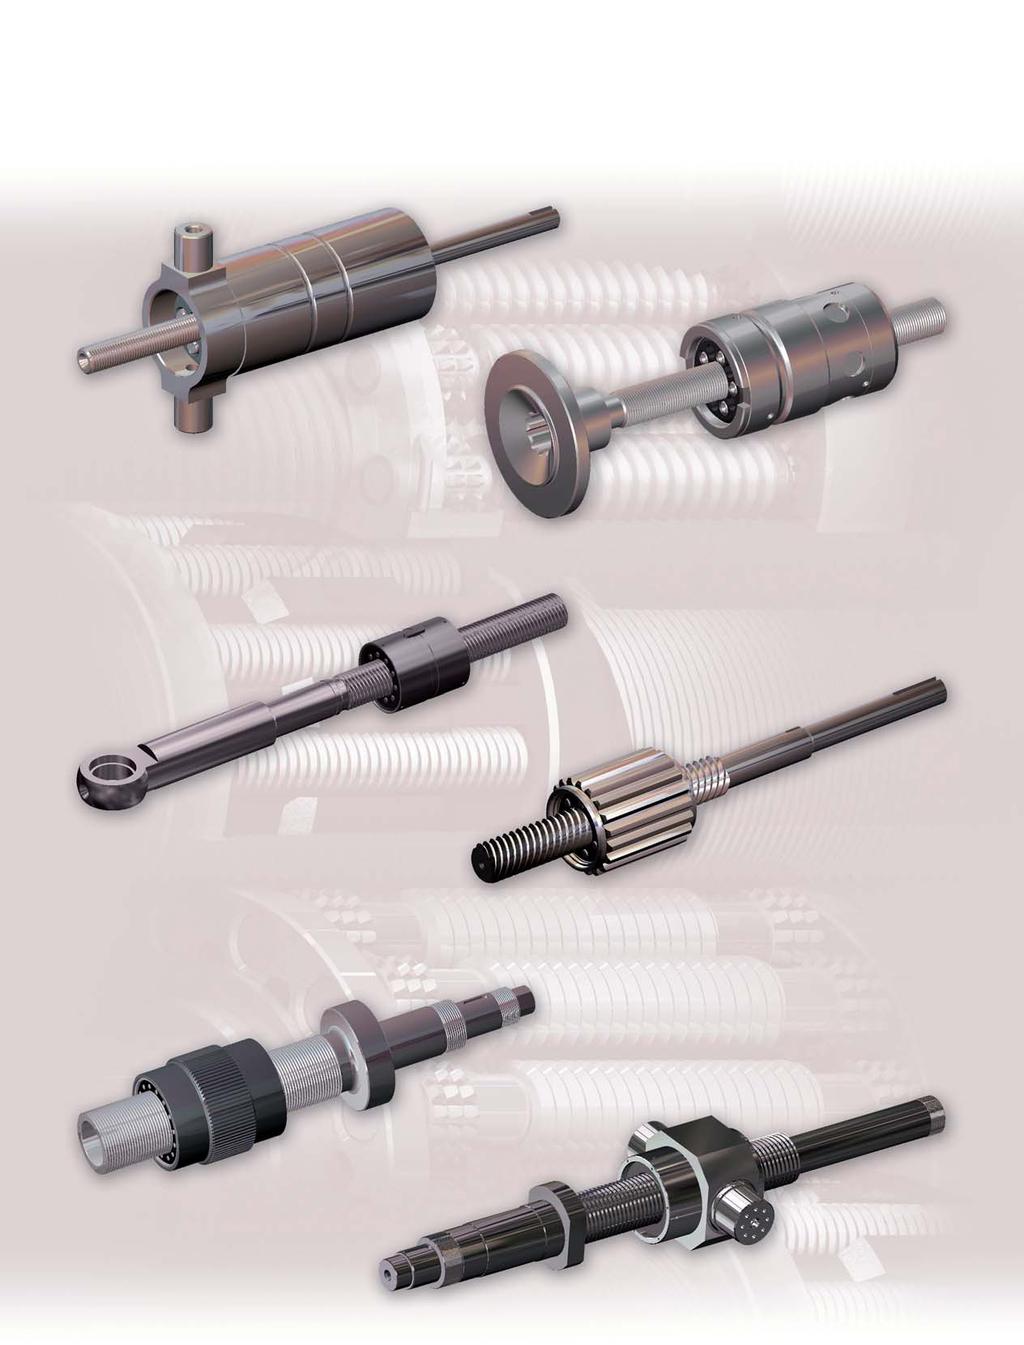 Applications The great flexibility of Rollvis SA means it can make all types of screws and nuts